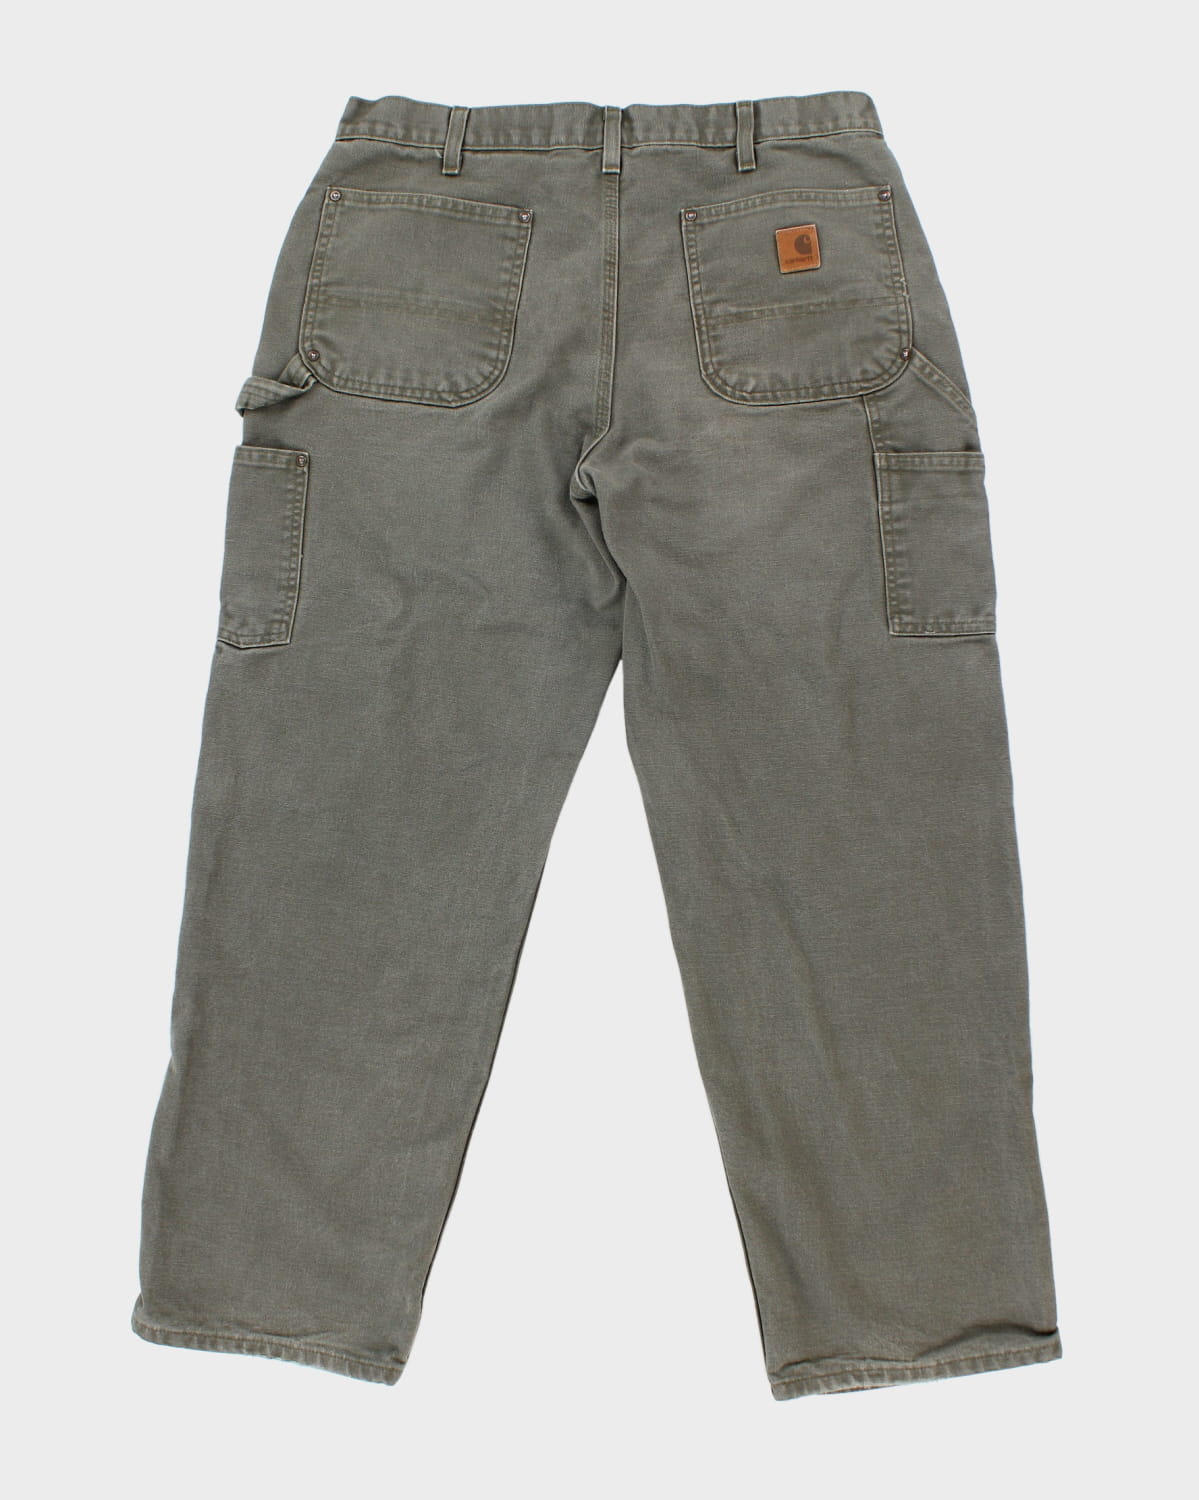 Carhartt Dungaree Fit Double Knee Trousers - W36 L30